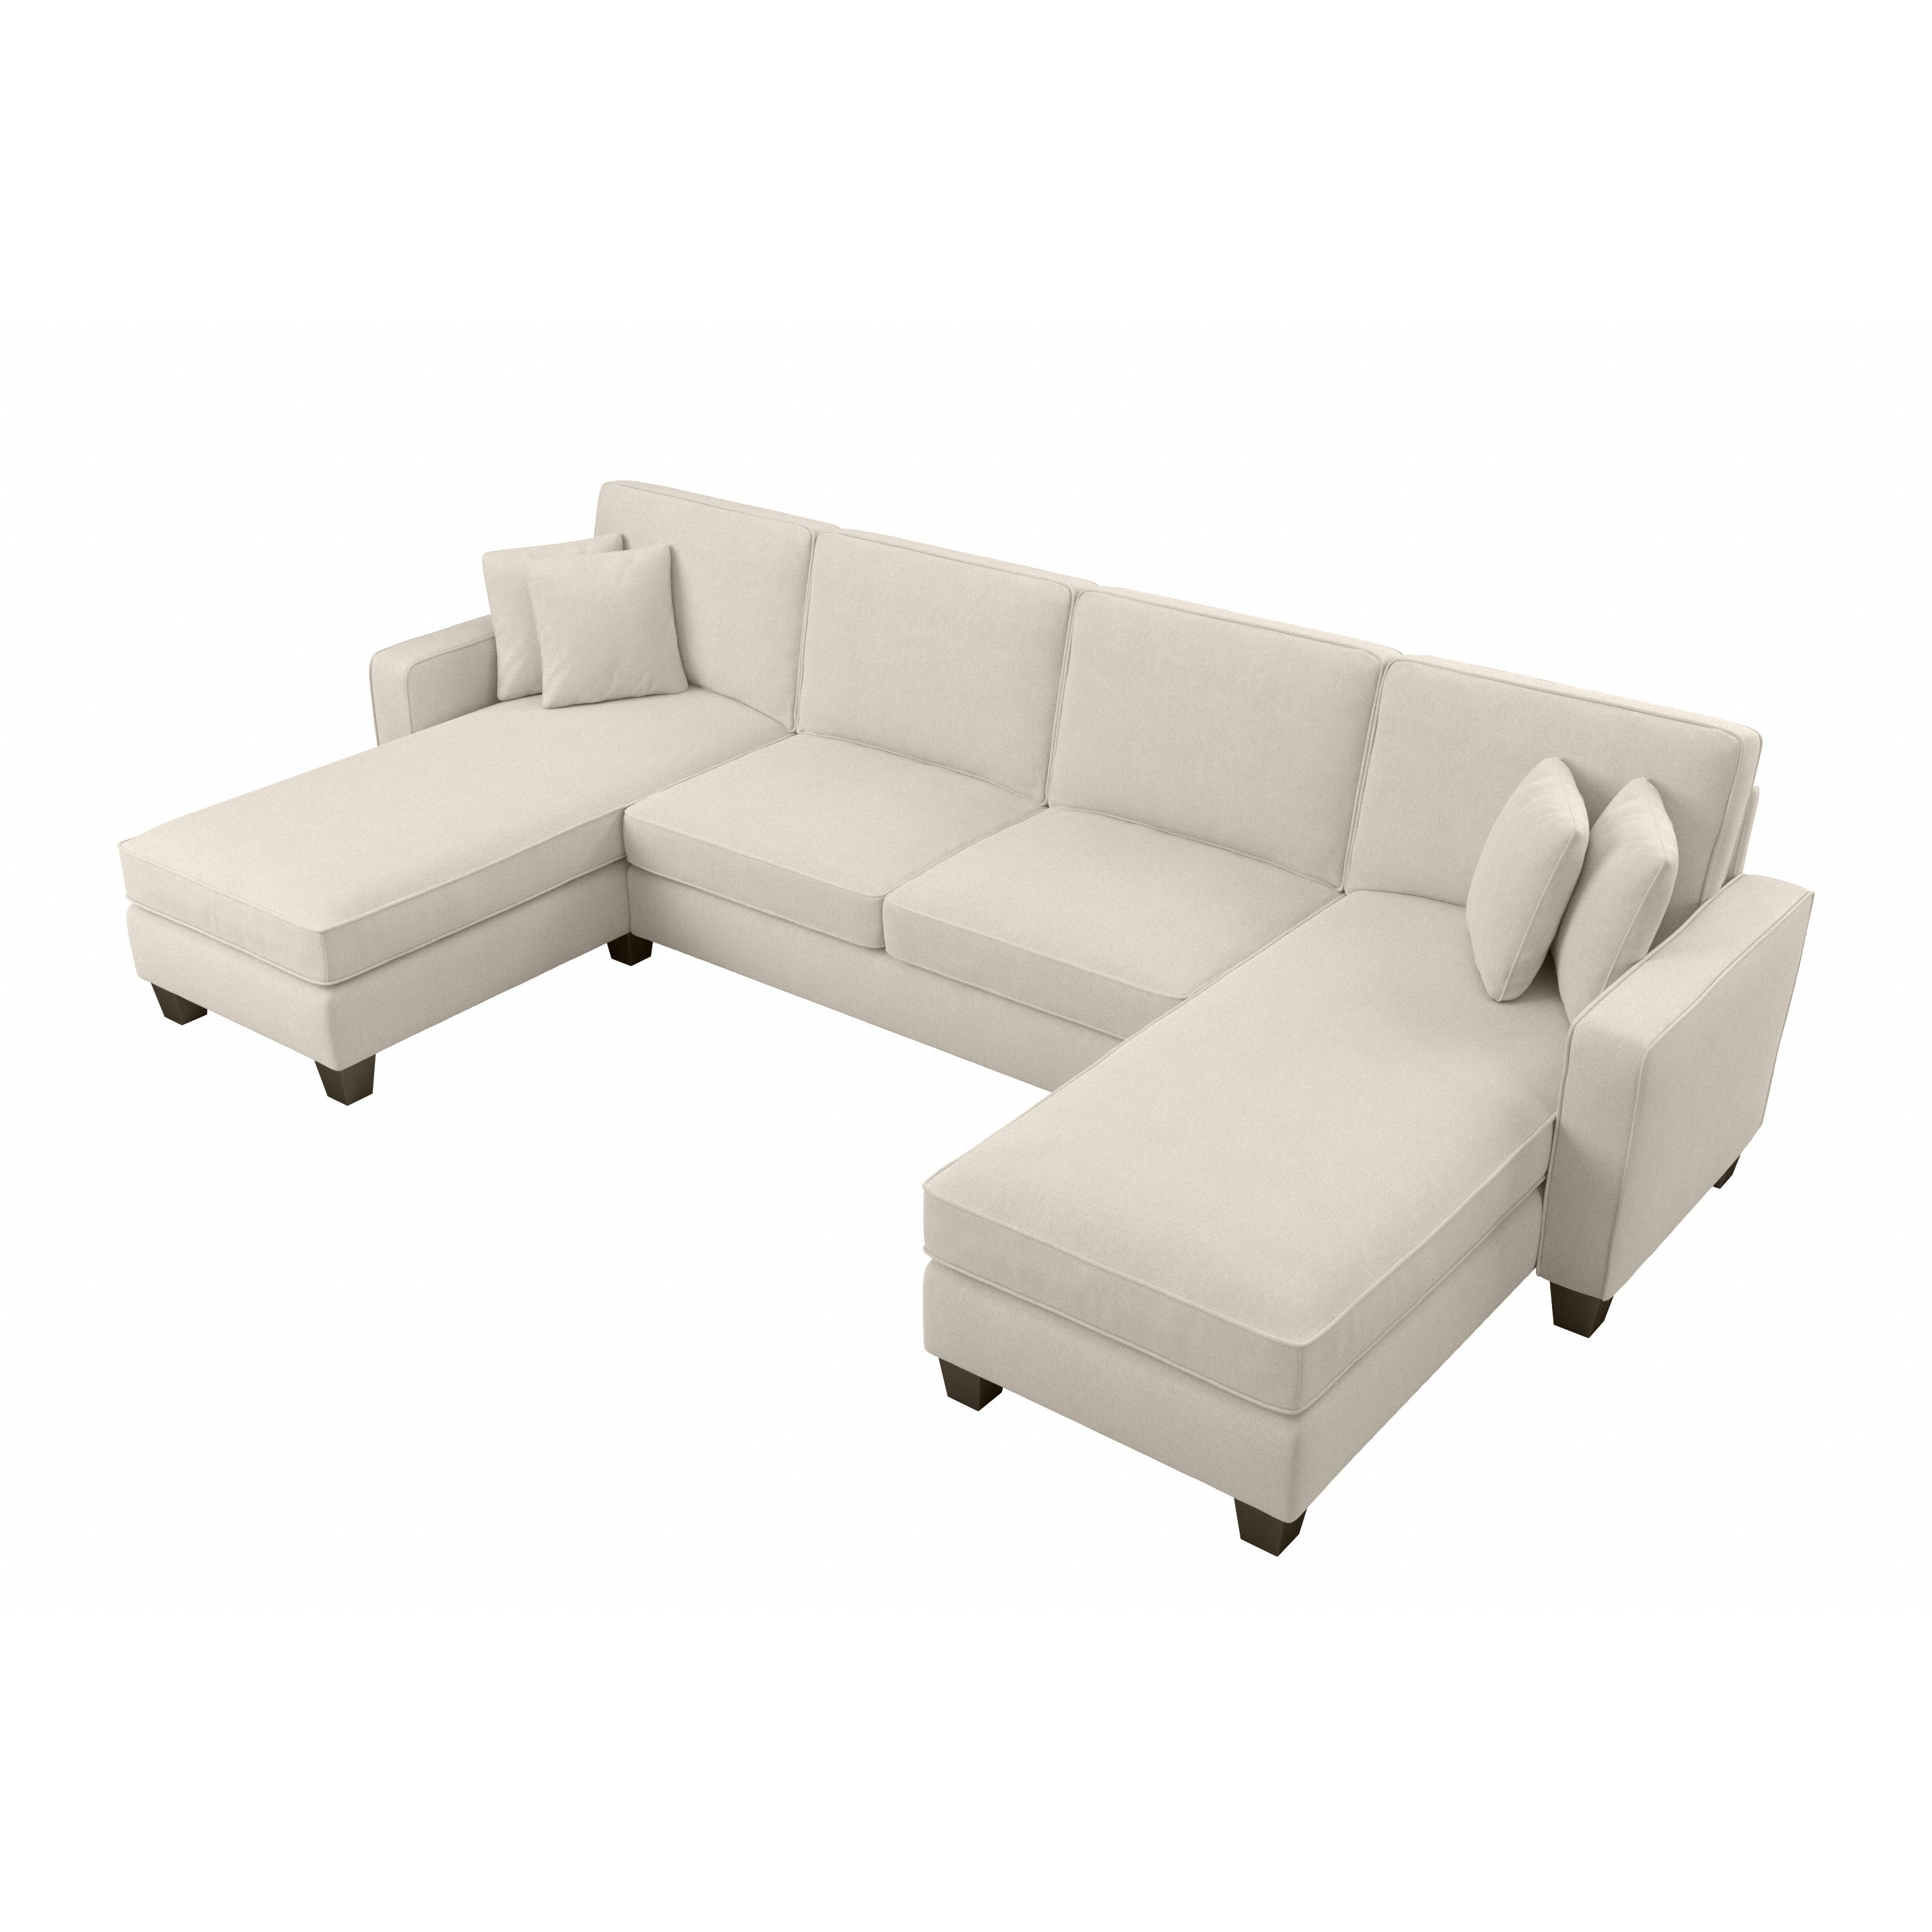 Shop Bush Furniture Stockton 131W Sectional Couch with Double Chaise Lounge 02 SNY130SCRH-03K #color_cream herringbone fabric